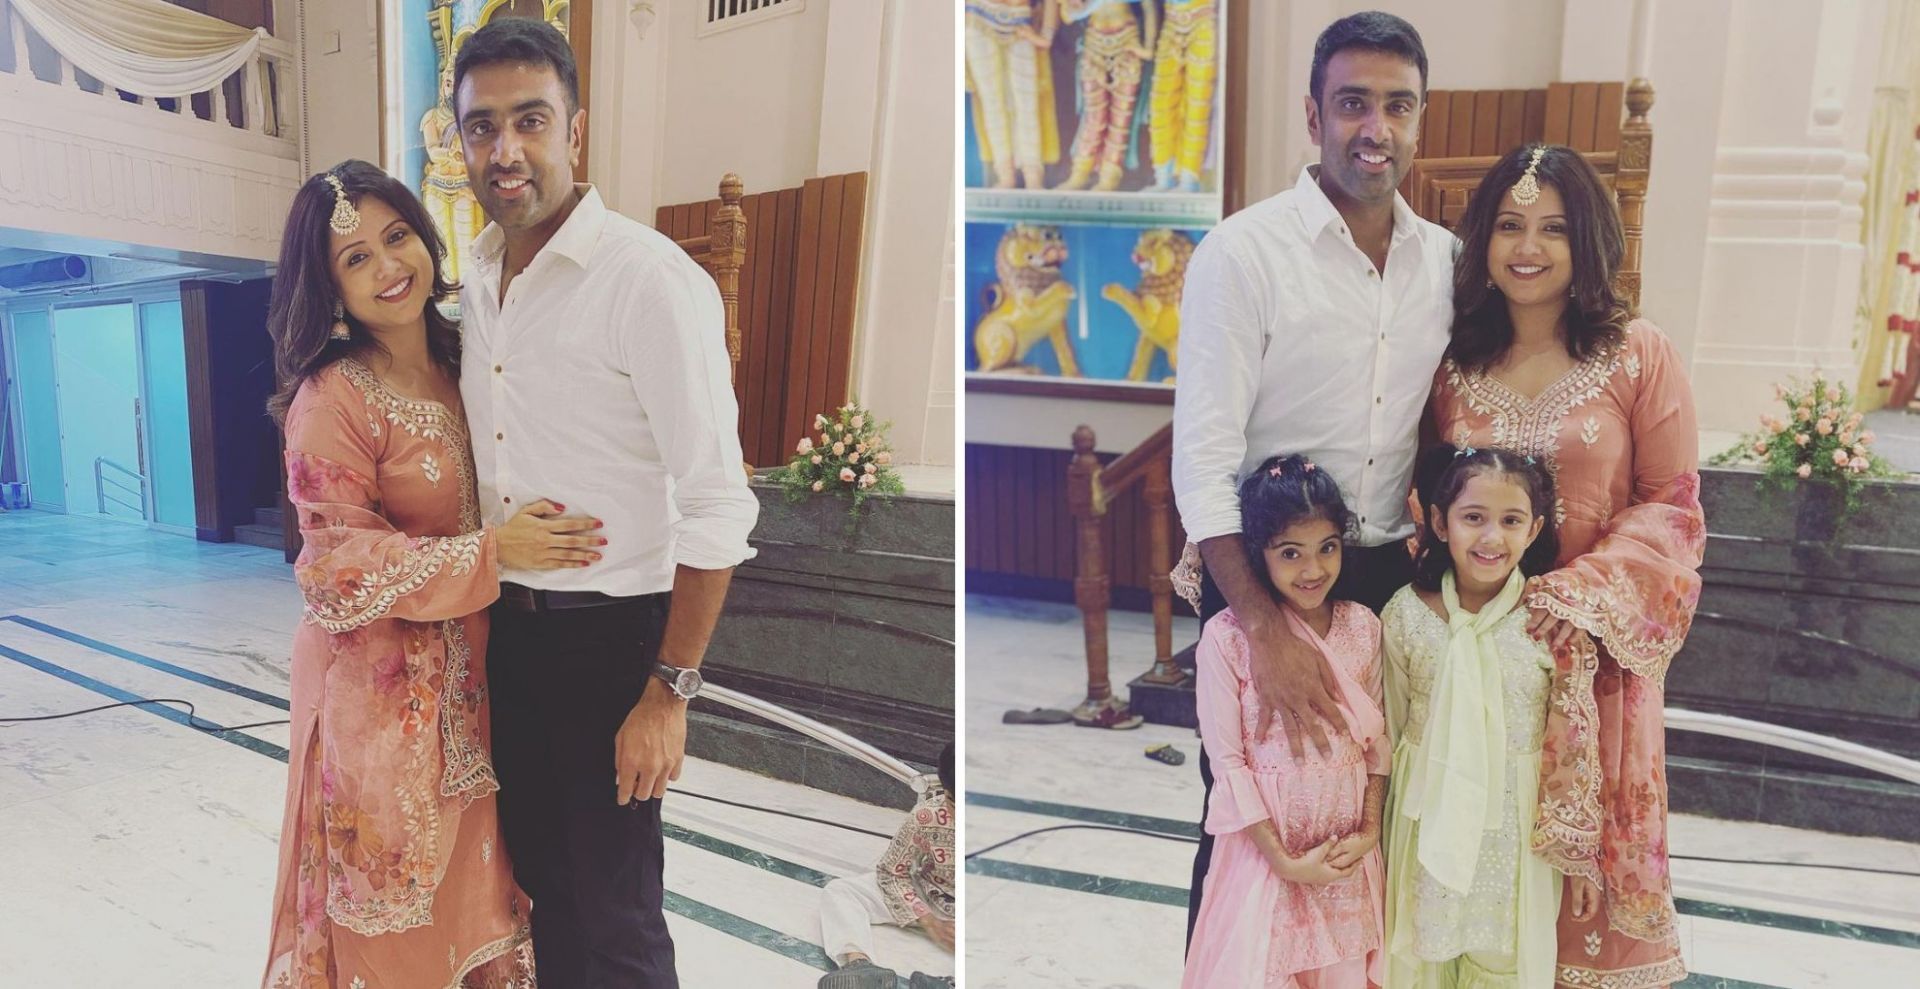 Ravichandran Ashwin along with his wife and daughters. (Credit: Instagram)